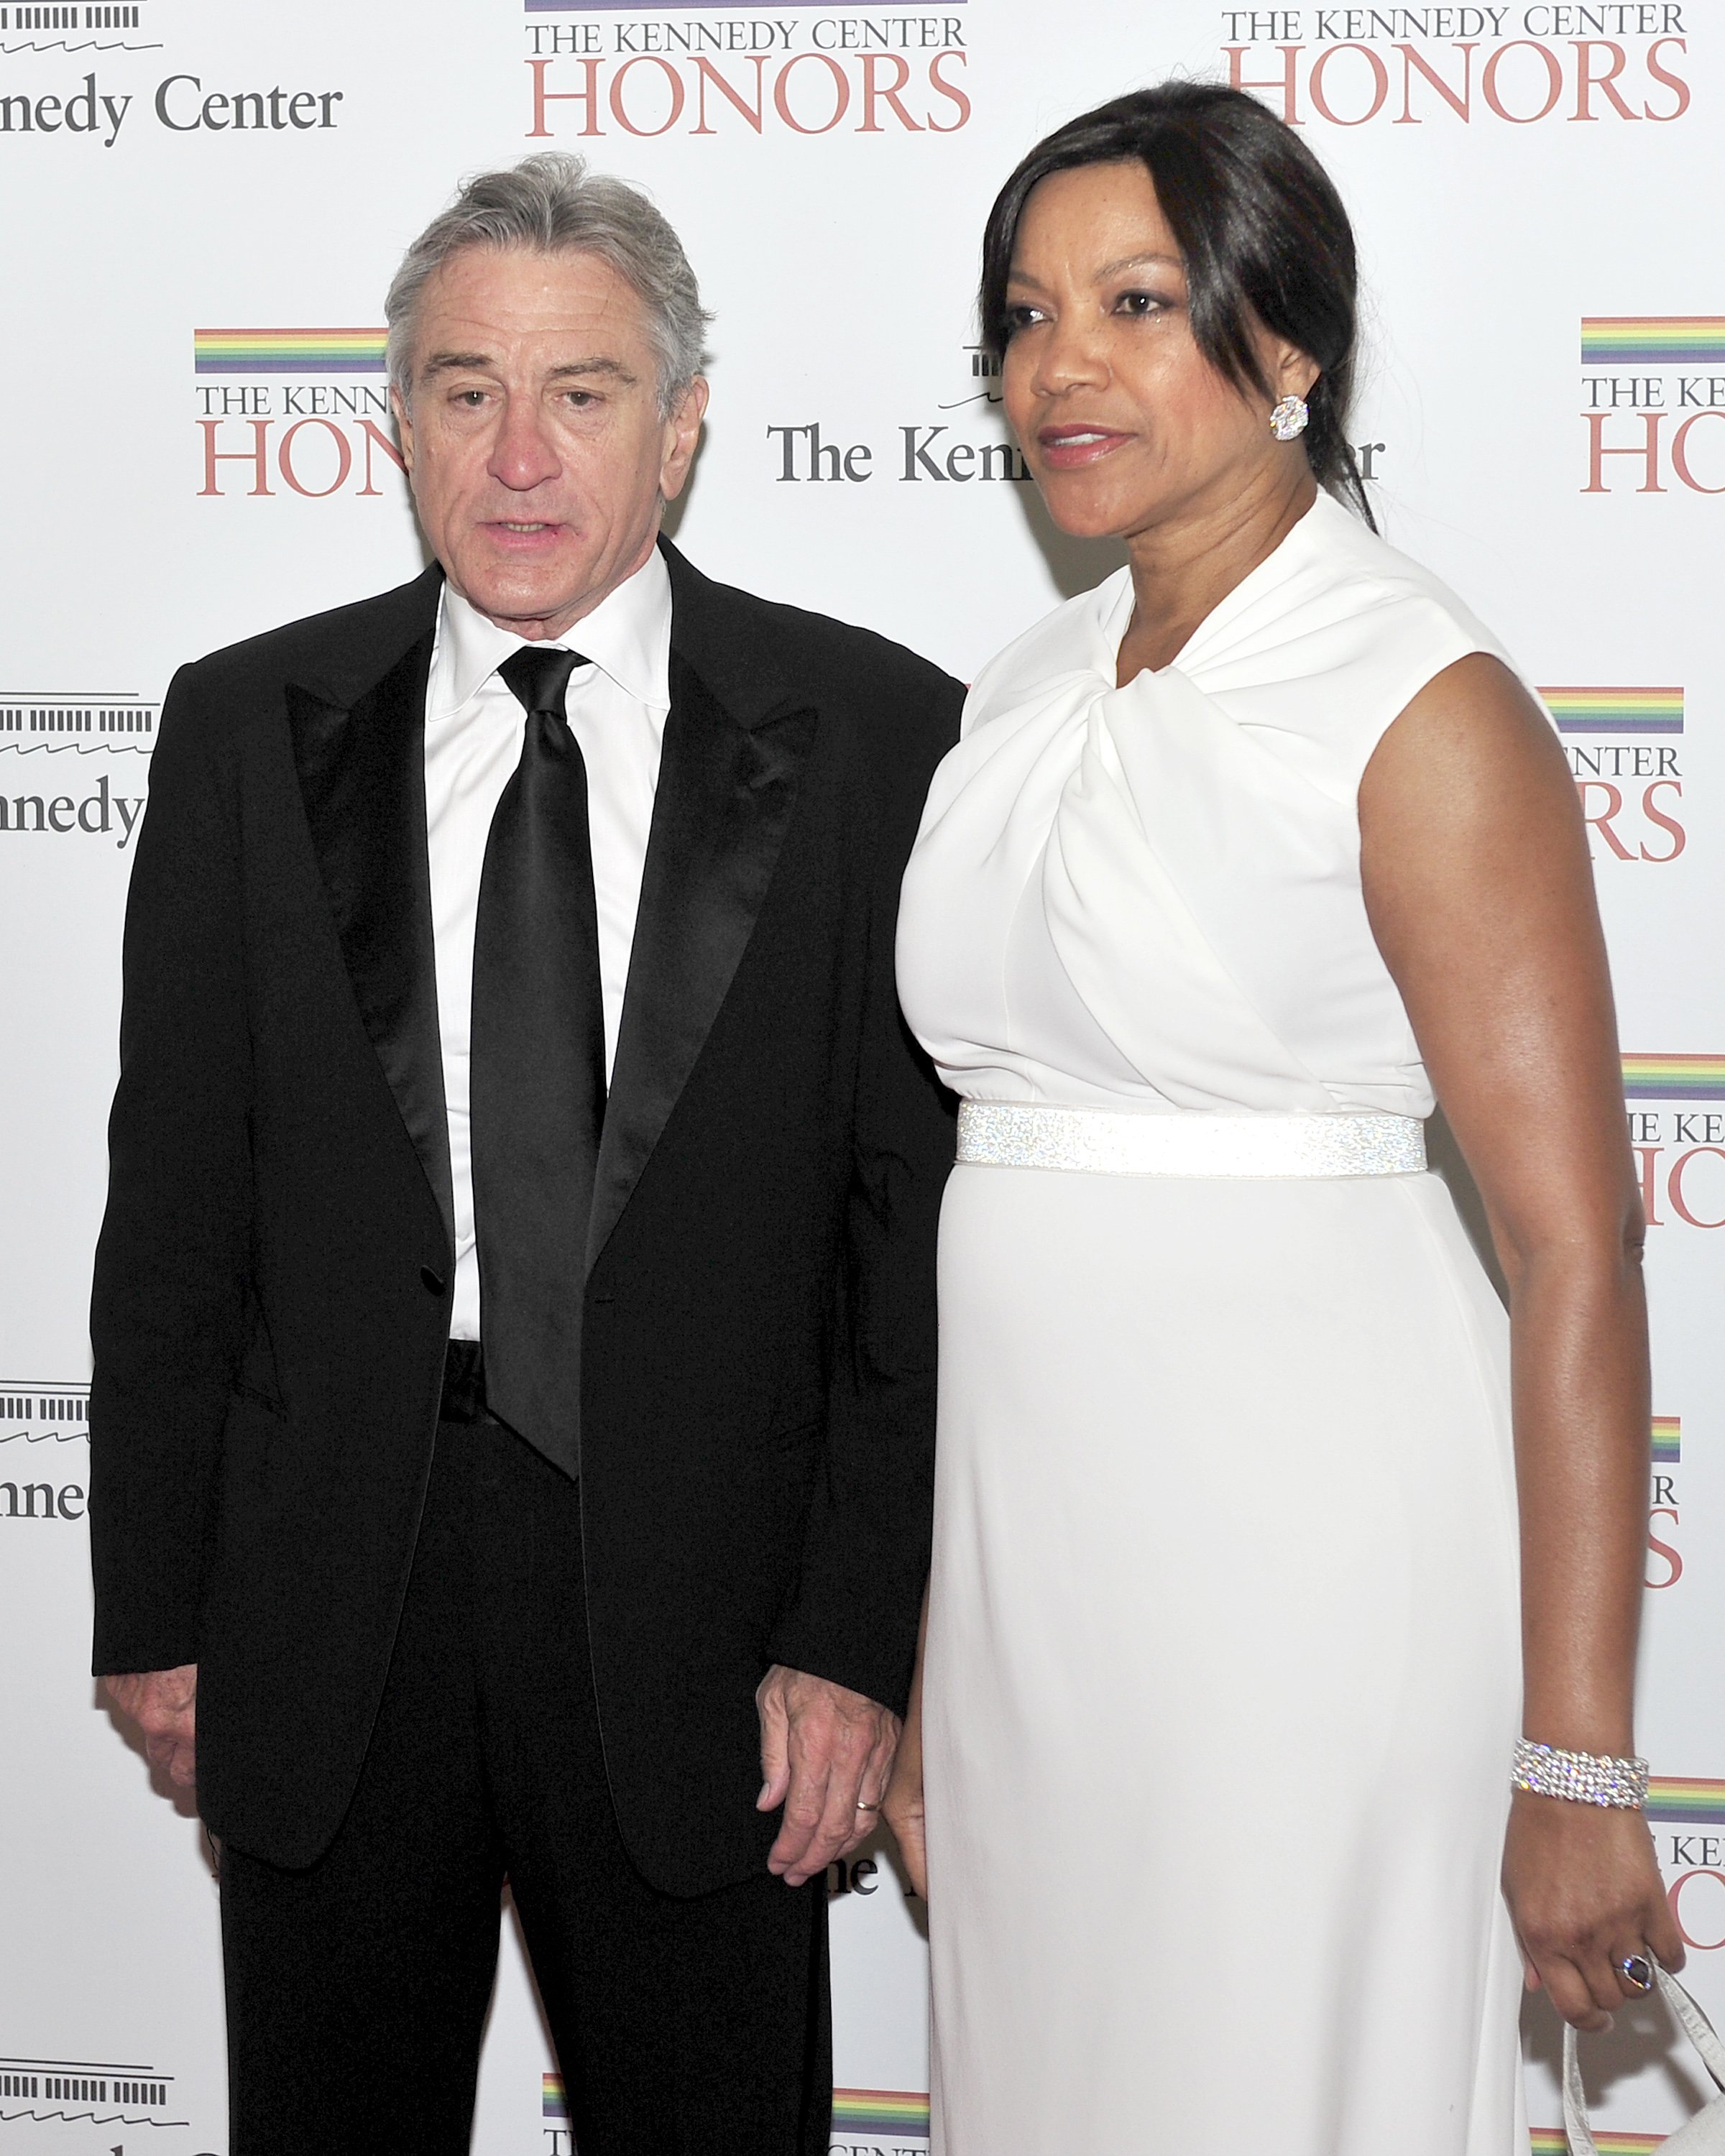 Robert De Niro and Grace Hightower arrive for the formal Artist's Dinner honoring the recipients of the 2011 Kennedy Center Honors at the U.S. Department of State on December 3, 2011 in Washington, DC | Source: Getty Images